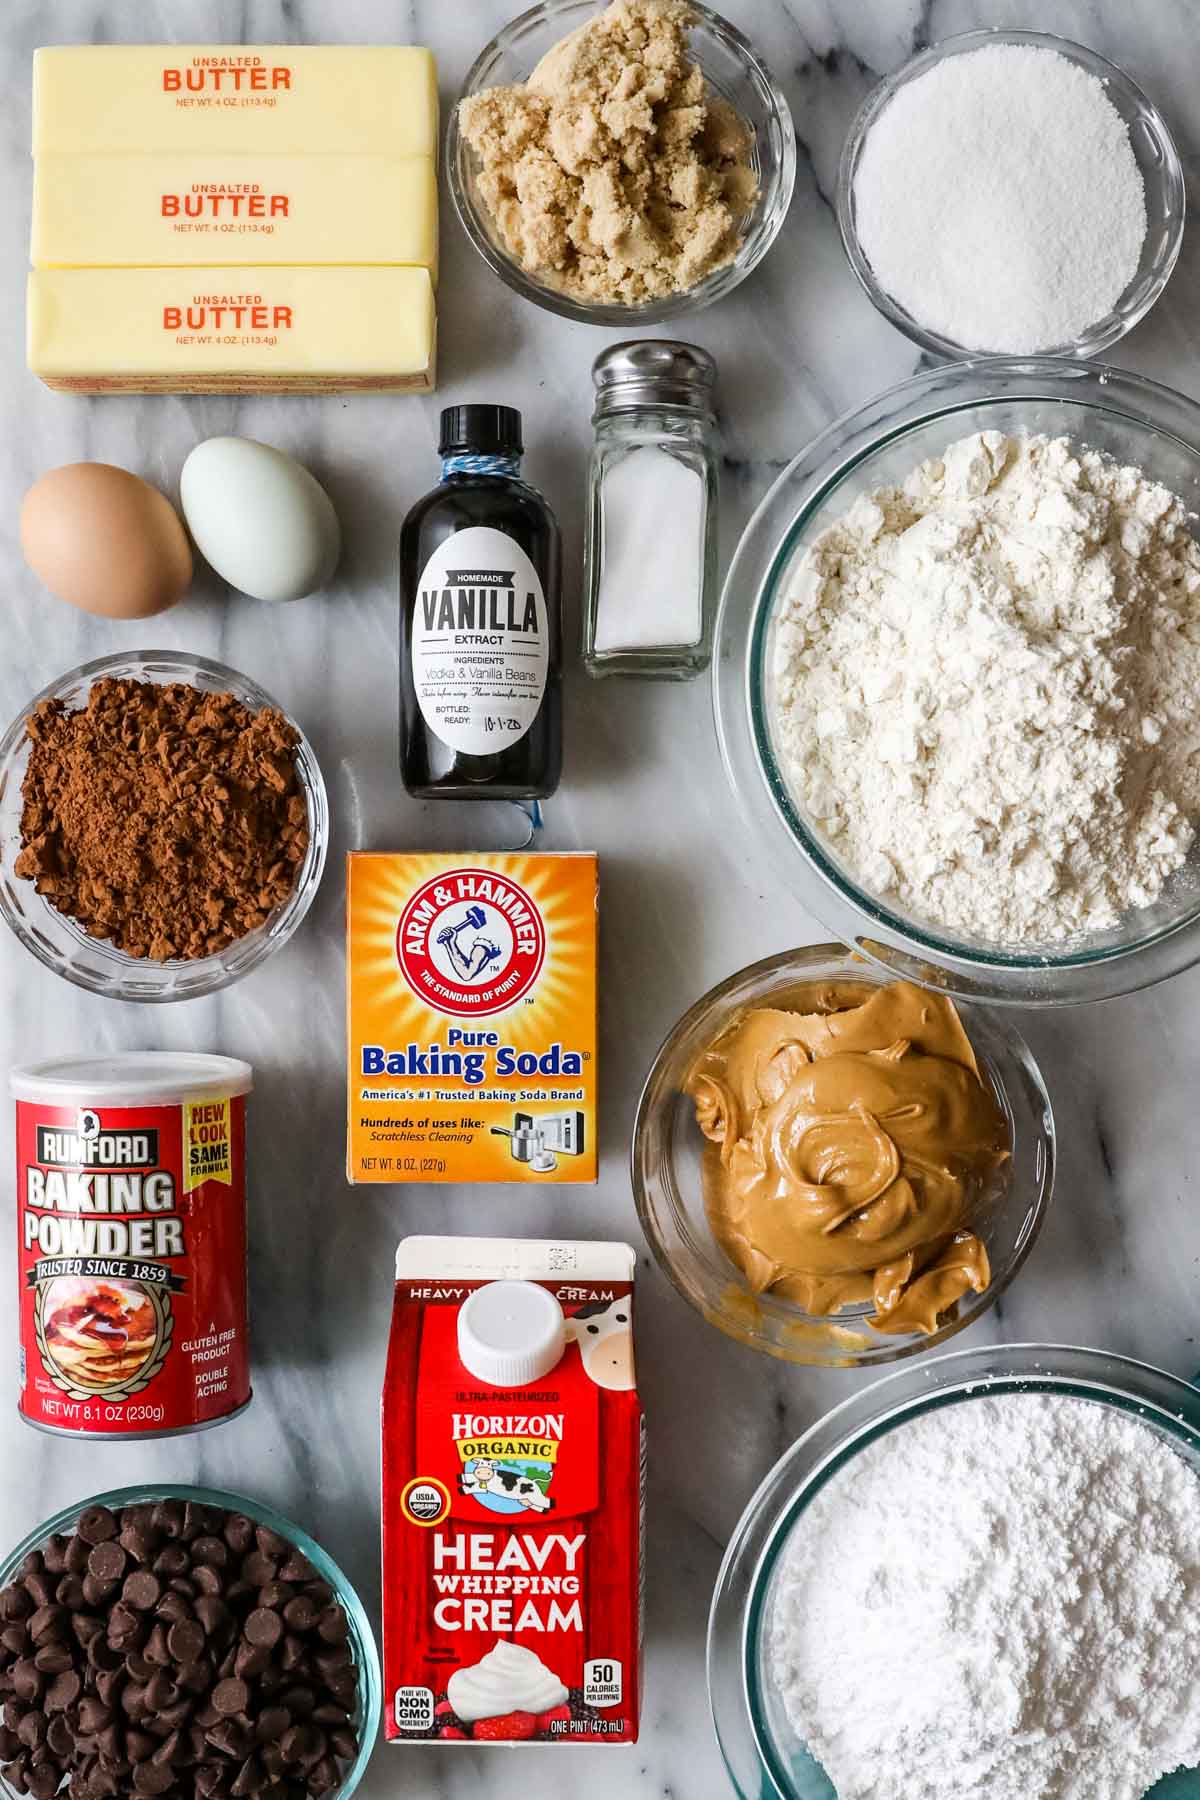 Overhead view of ingredients including brown sugar, cocoa powder, peanut butter, and more.